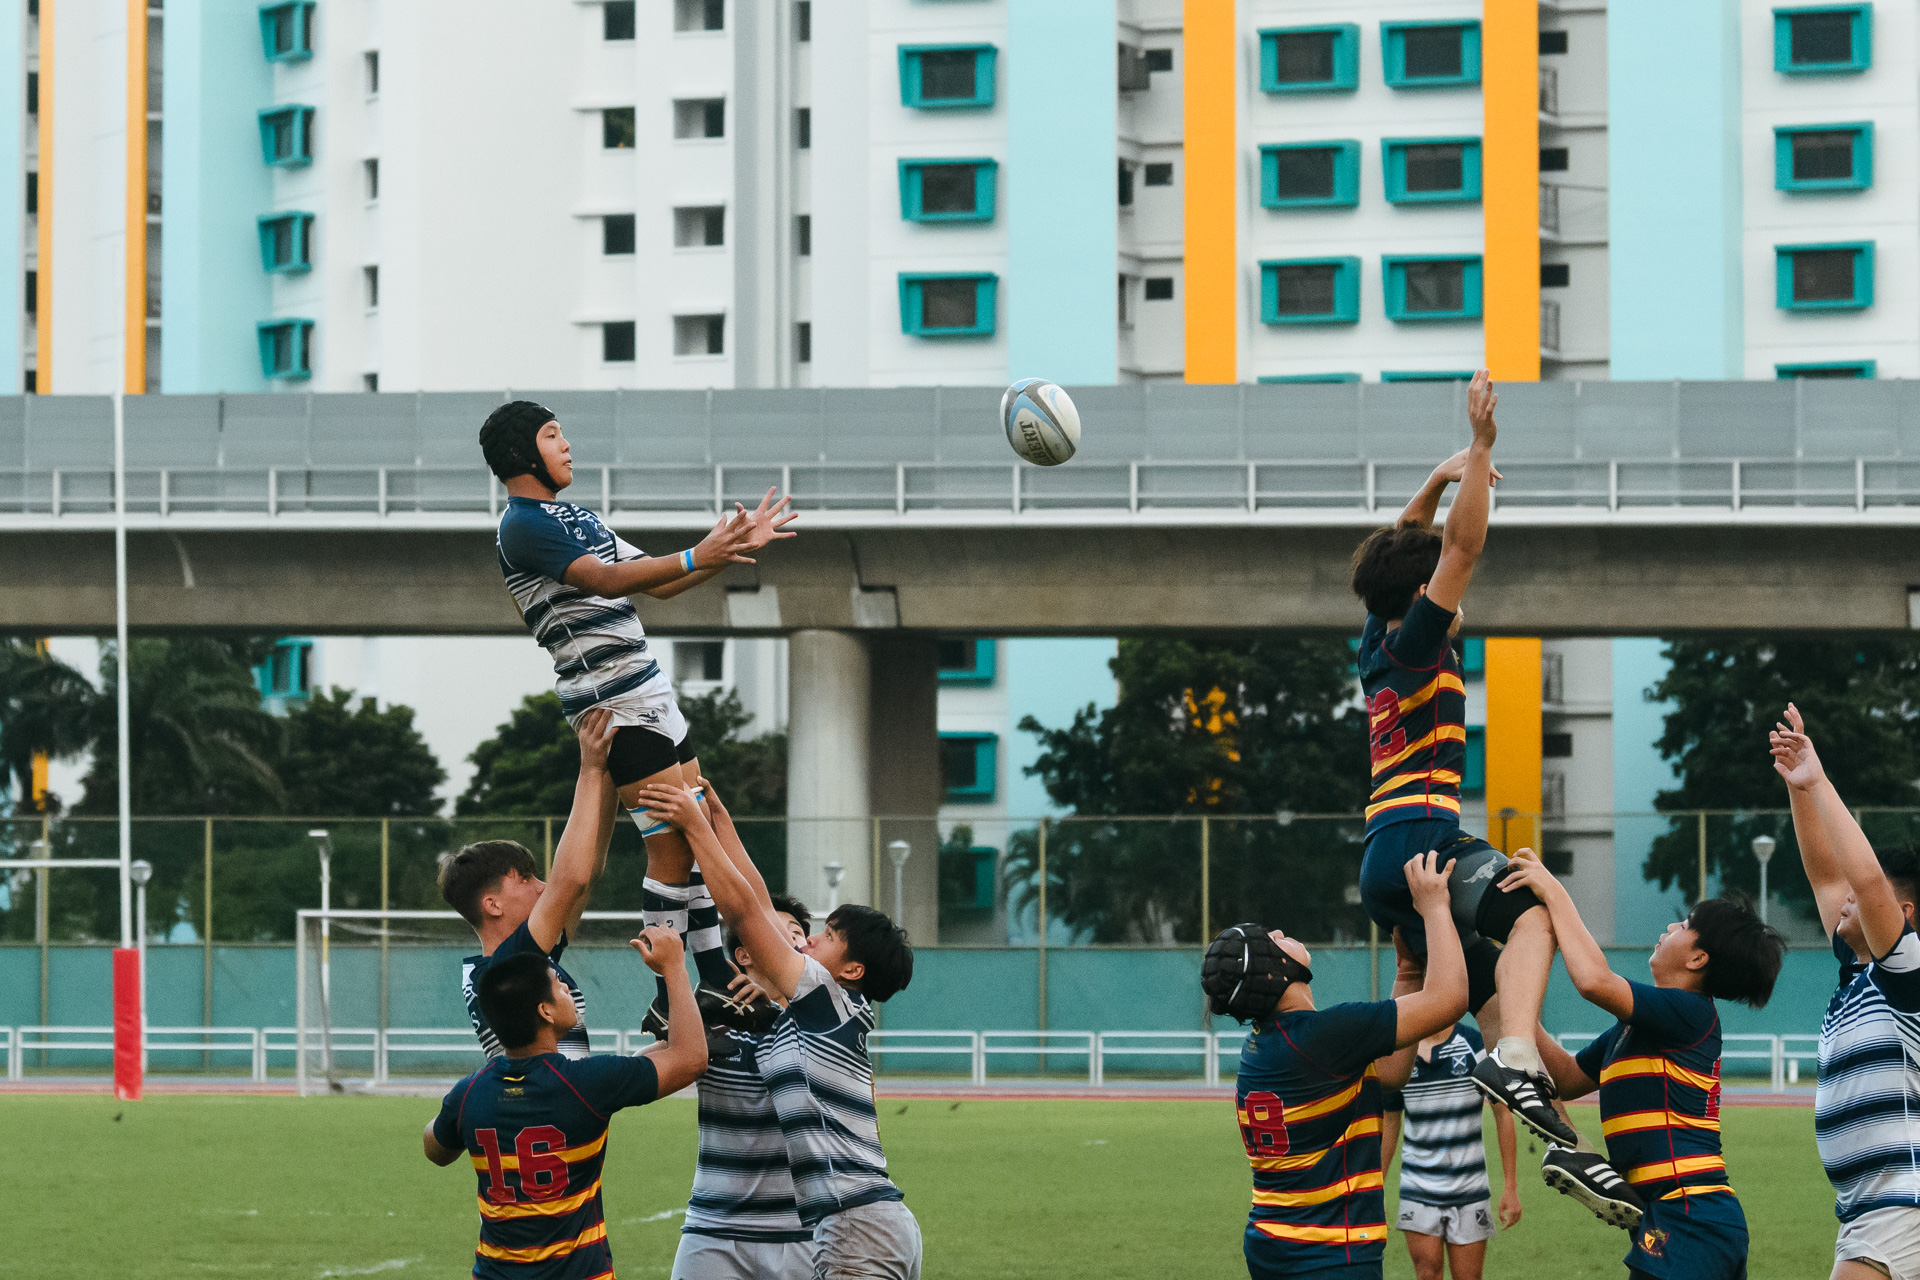 A St. Andrew’s player awaits the ball while being lifted. (Photo 14 © Joash Chow/Red Sports)